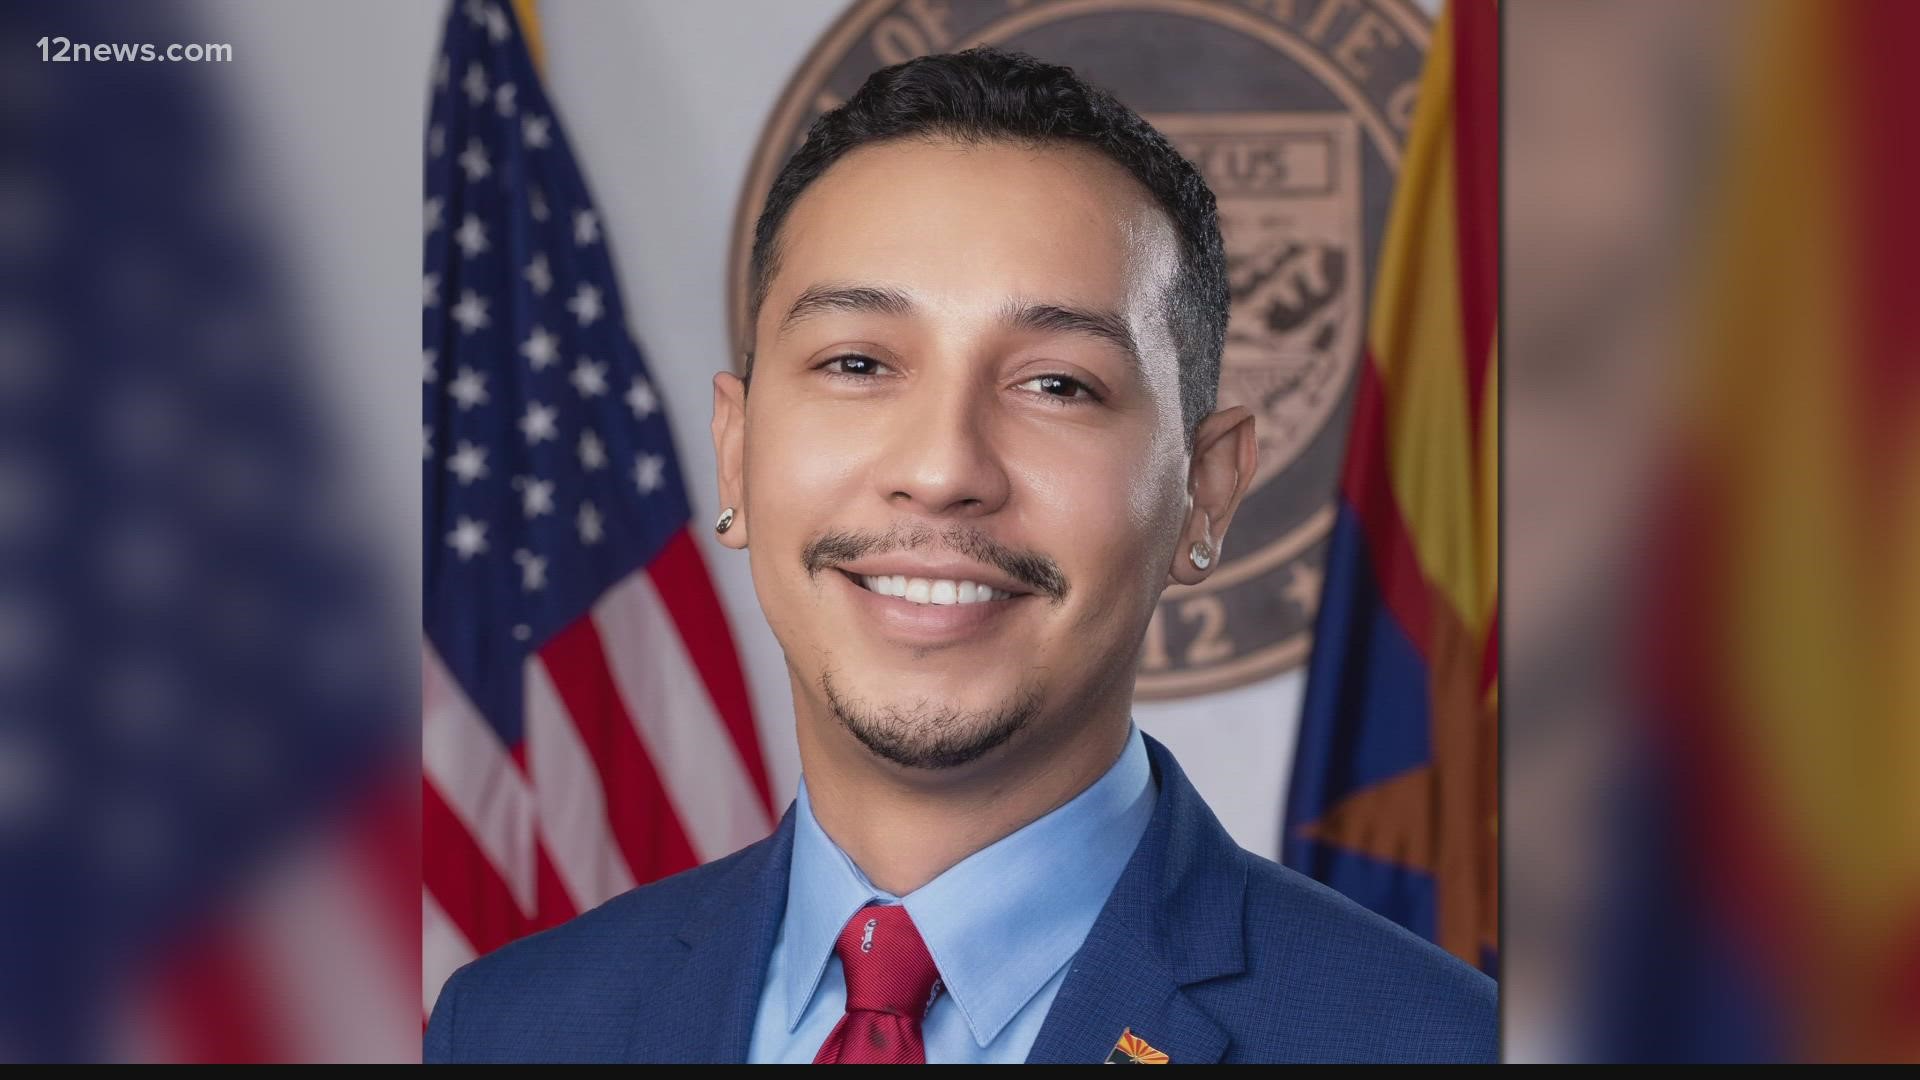 Democratic State Sen. Otoniel “Tony” Navarette was arrested Thursday night on charges of sexual conduct with a minor, a police source with told 12 News.